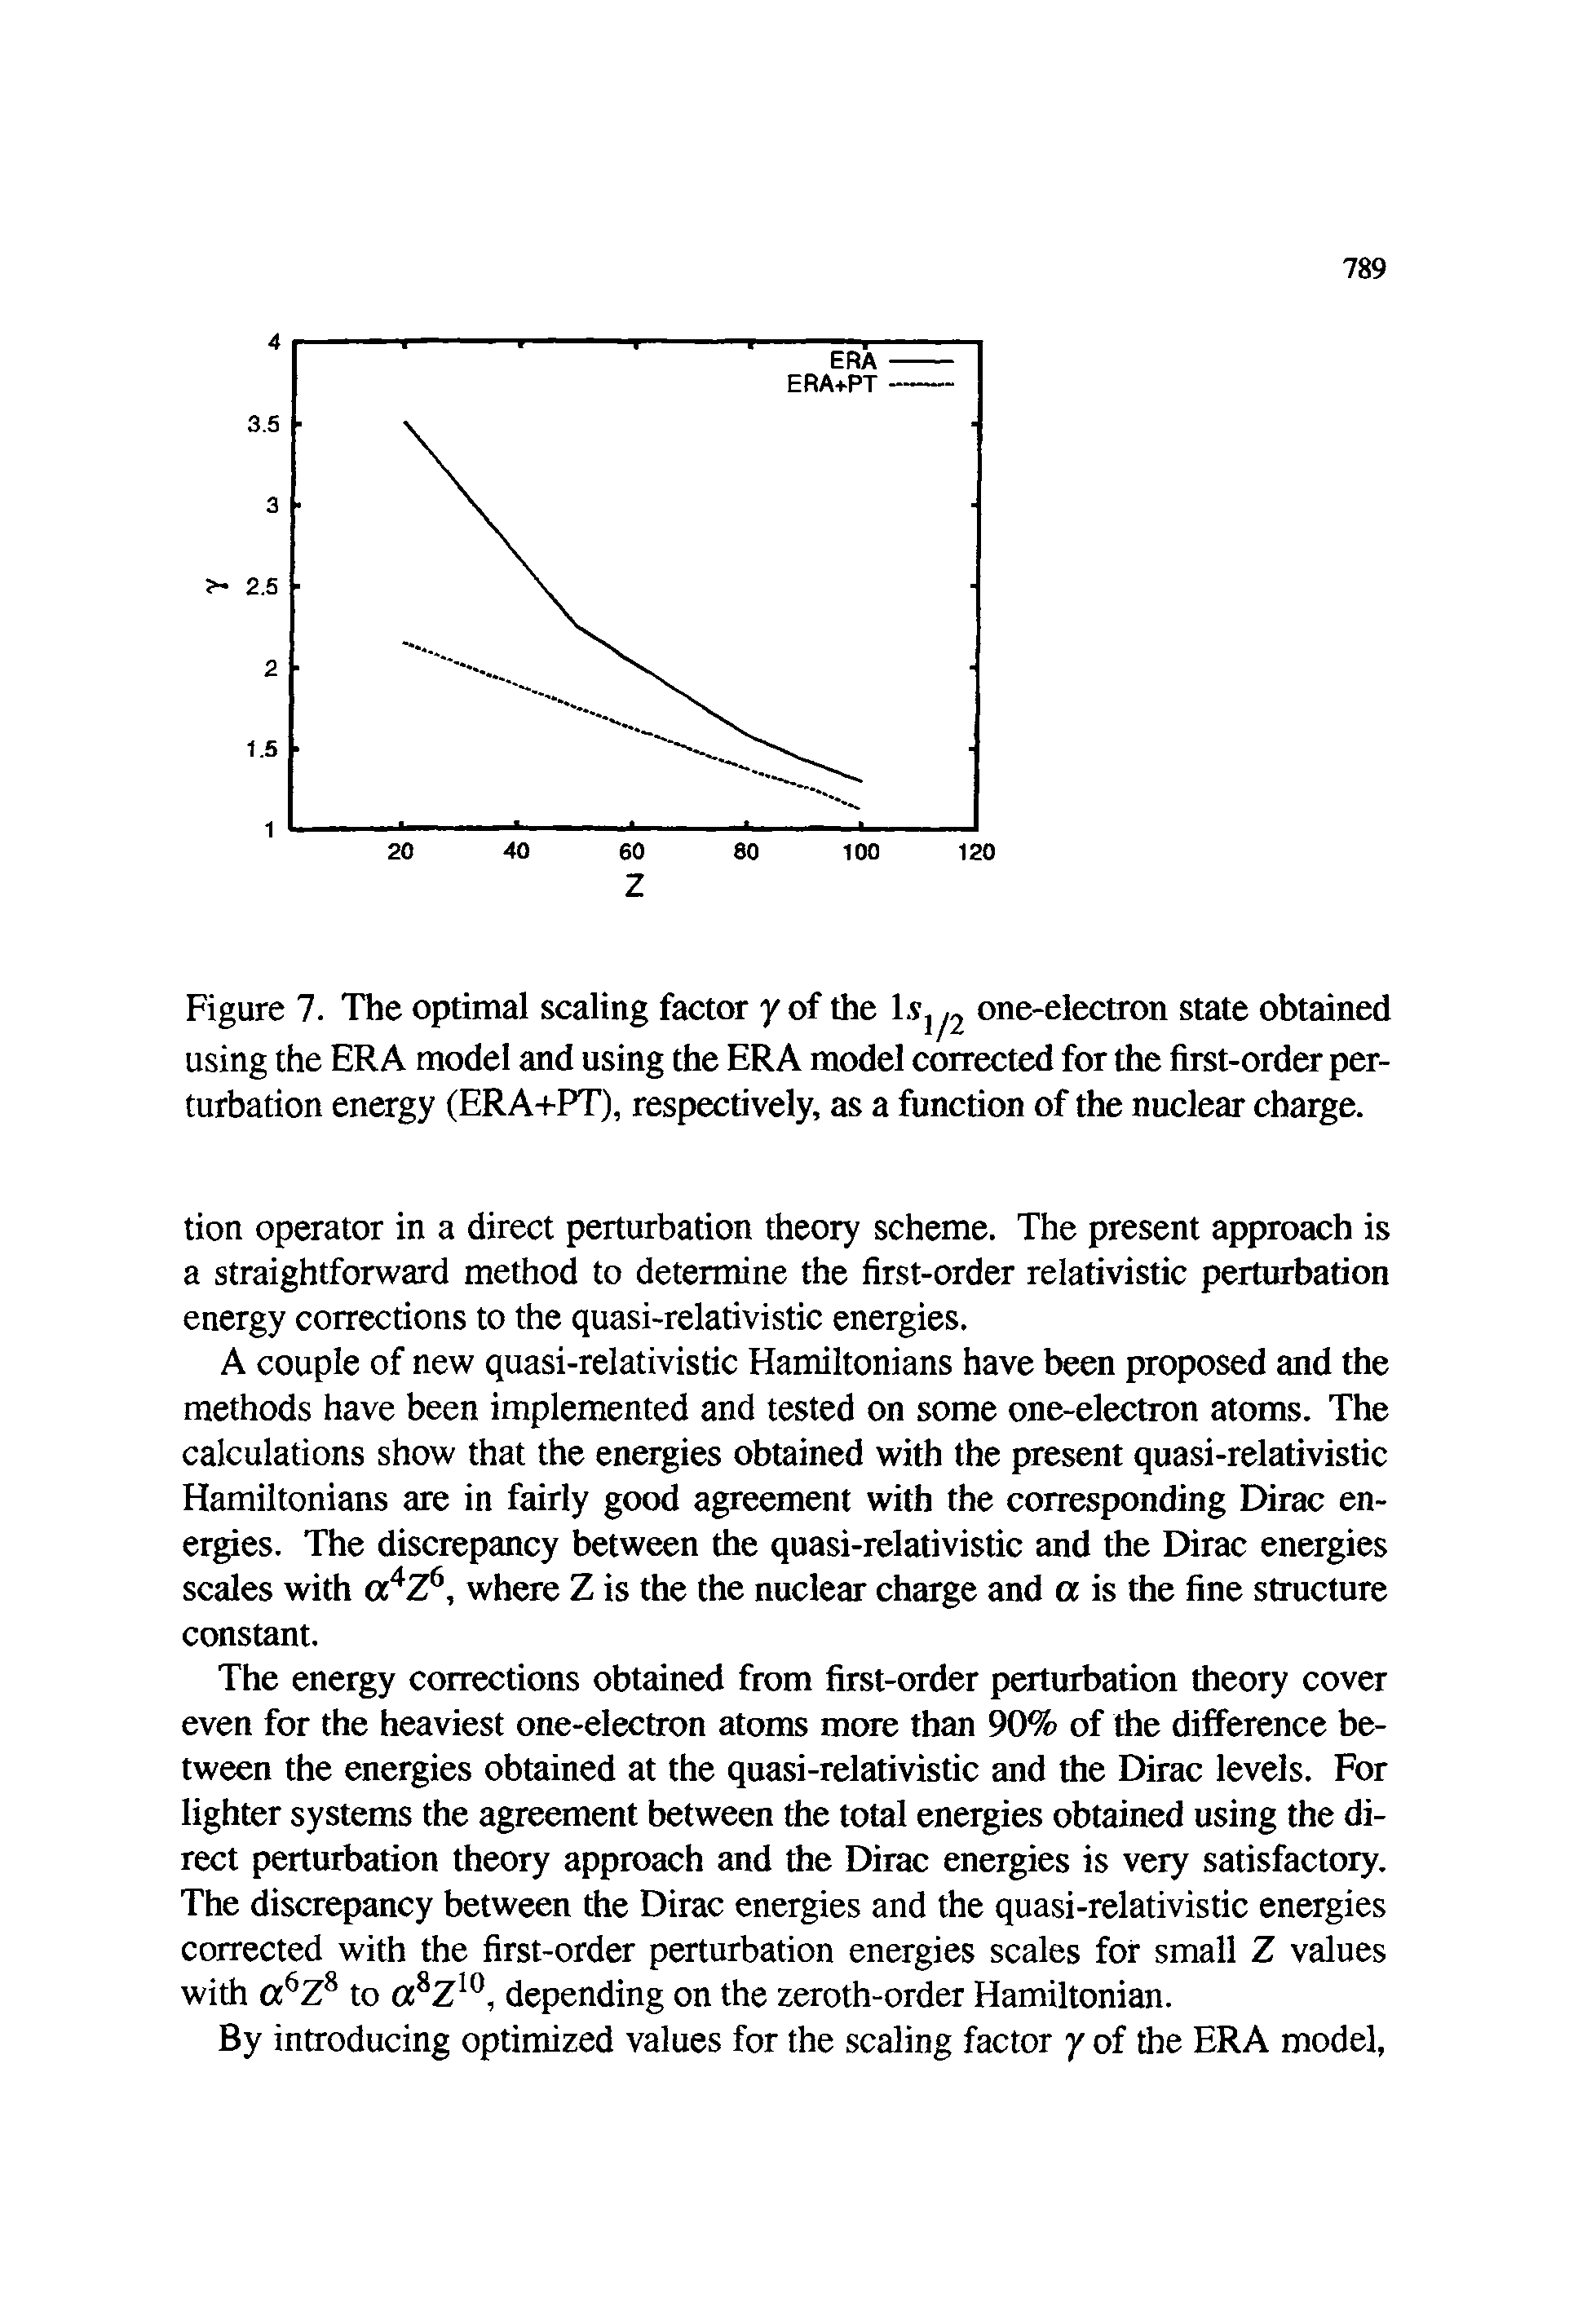 Figure 7. The optimal scaling factor y of the l-Sjyj one-electron state obtained using the ERA model and using the ERA model corrected for the first-order perturbation energy (ERA+PT), respectively, as a function of the nuclear charge.